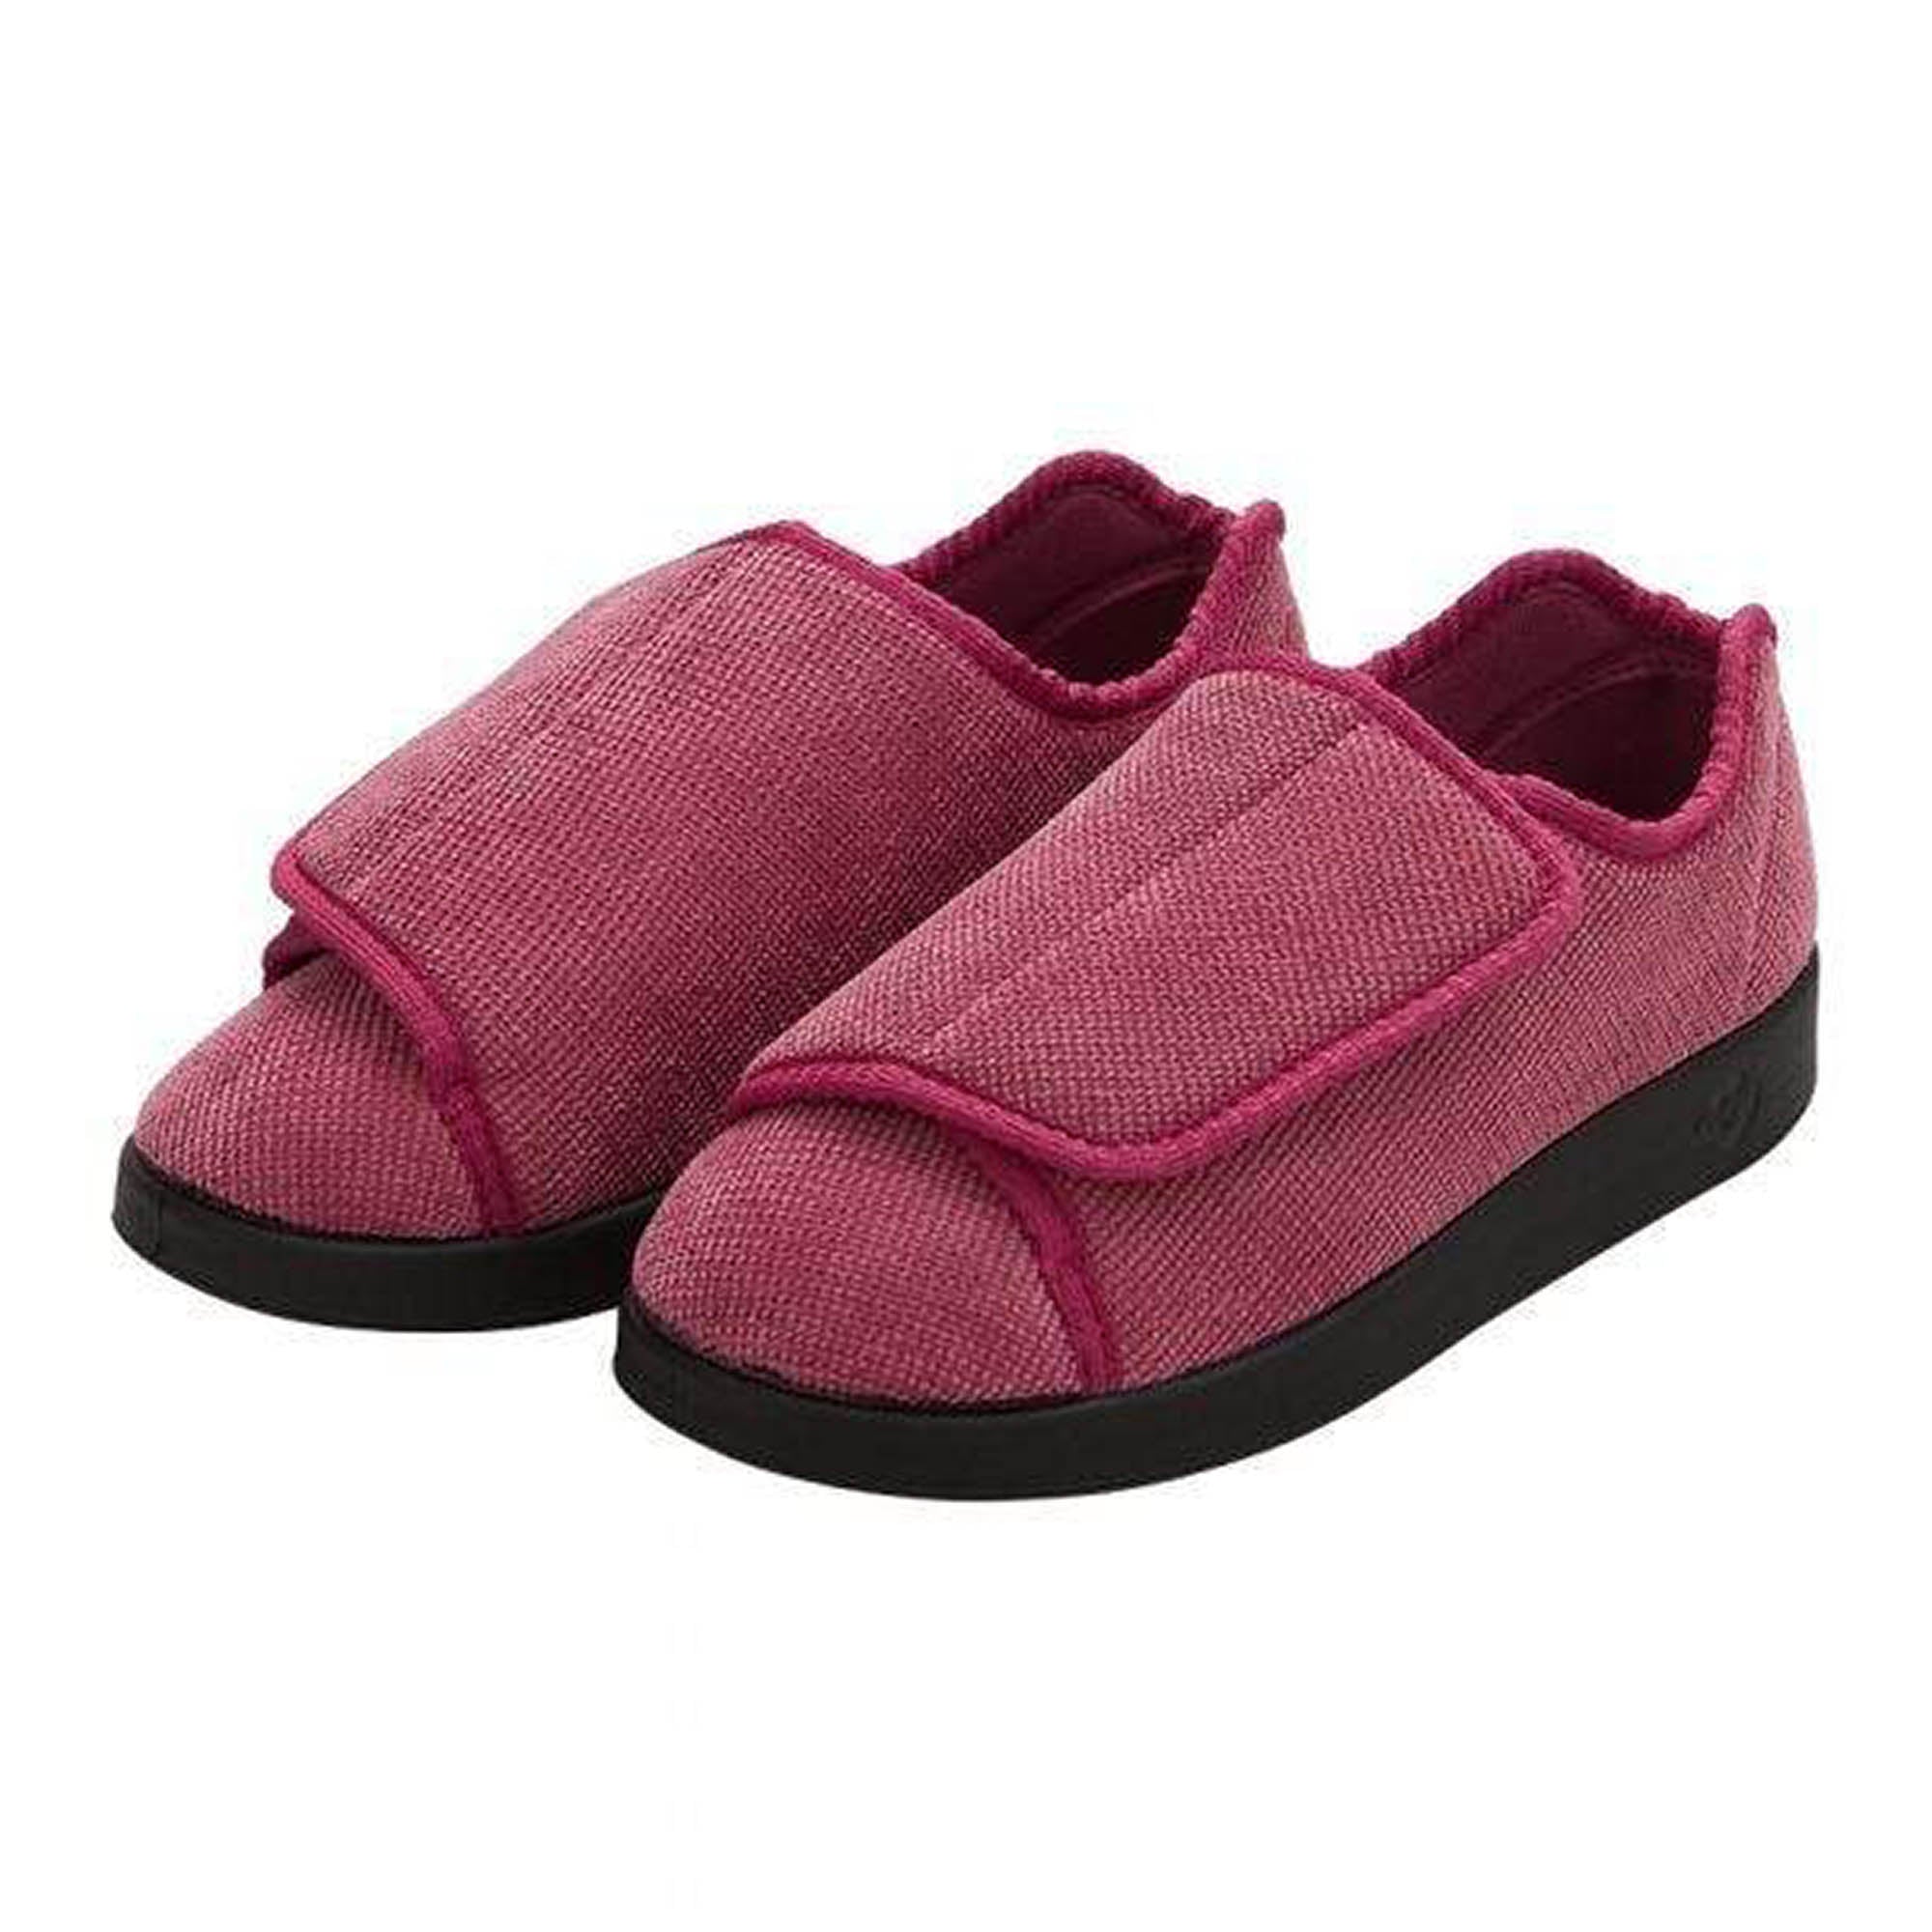 Silverts Women's Antimicrobial Extra Extra Wide Easy-Closure Slippers - Dusty Rose - 11